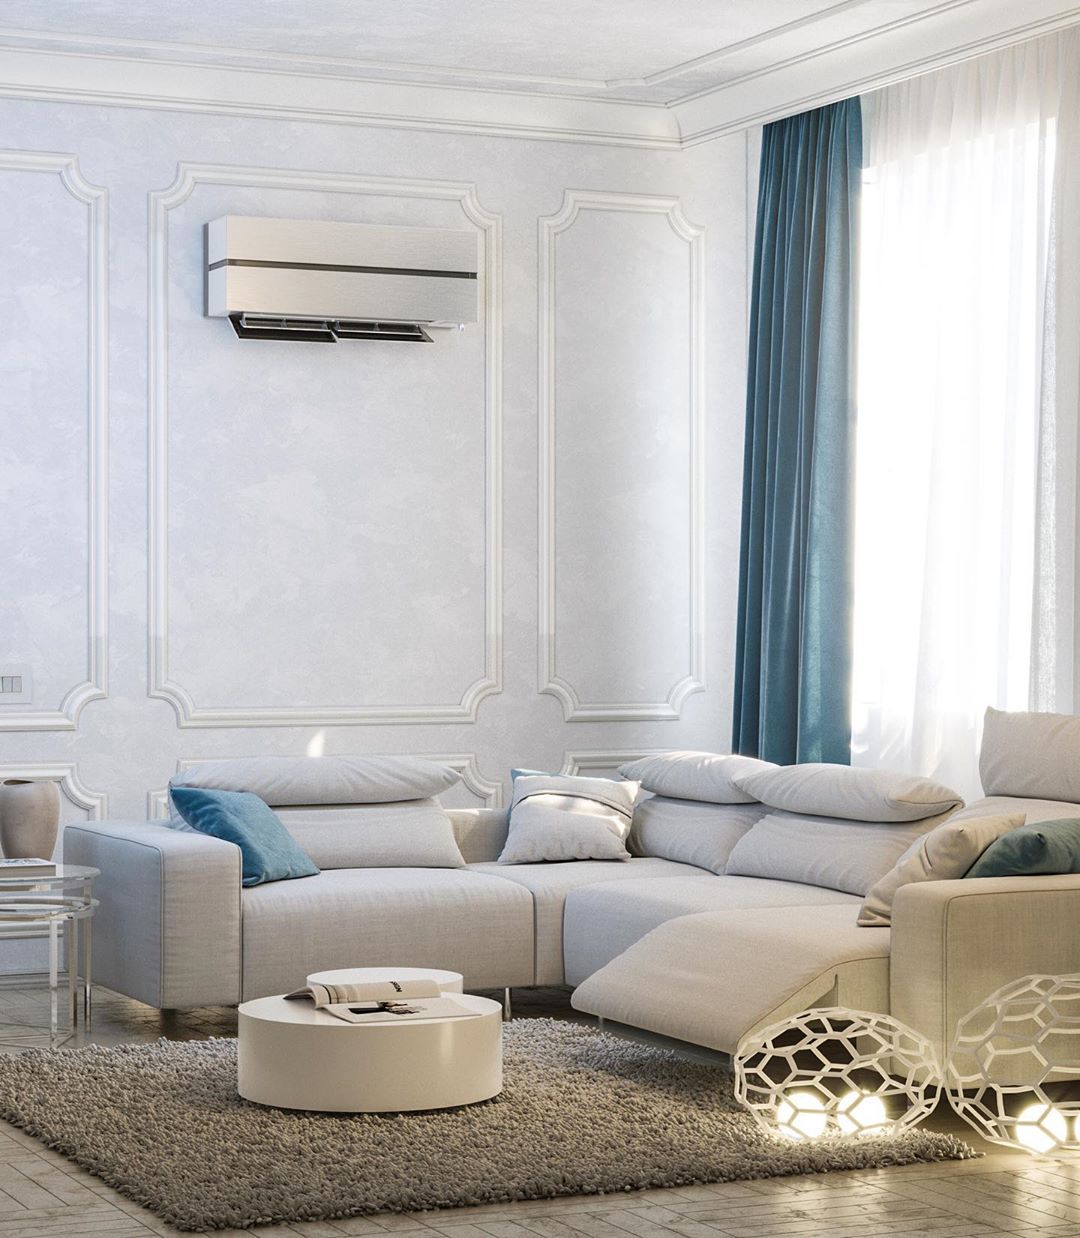 Living room air conditioner